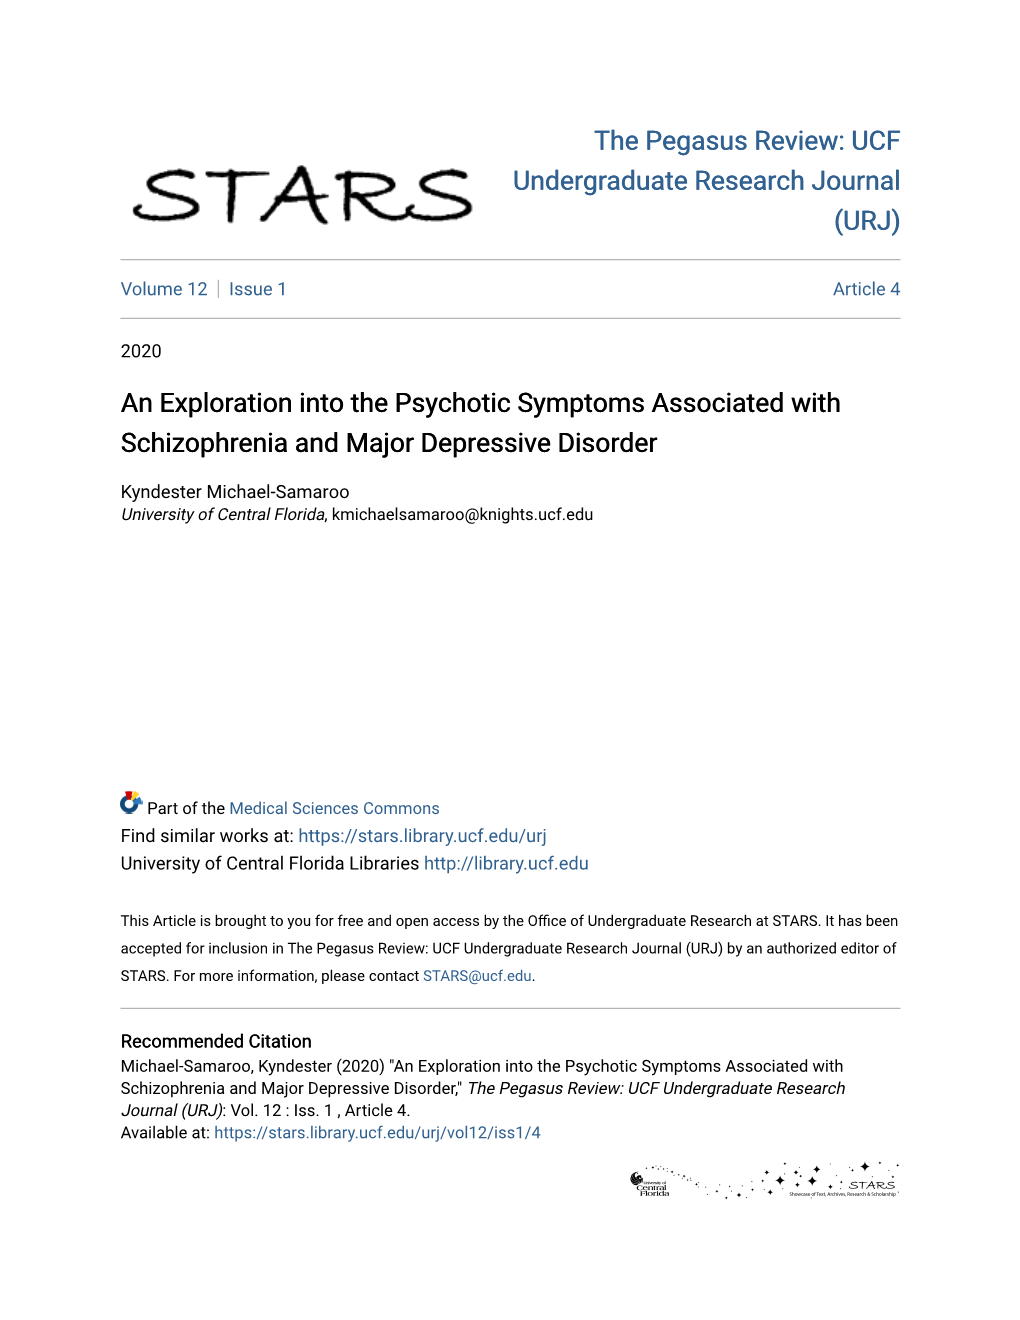 An Exploration Into the Psychotic Symptoms Associated with Schizophrenia and Major Depressive Disorder